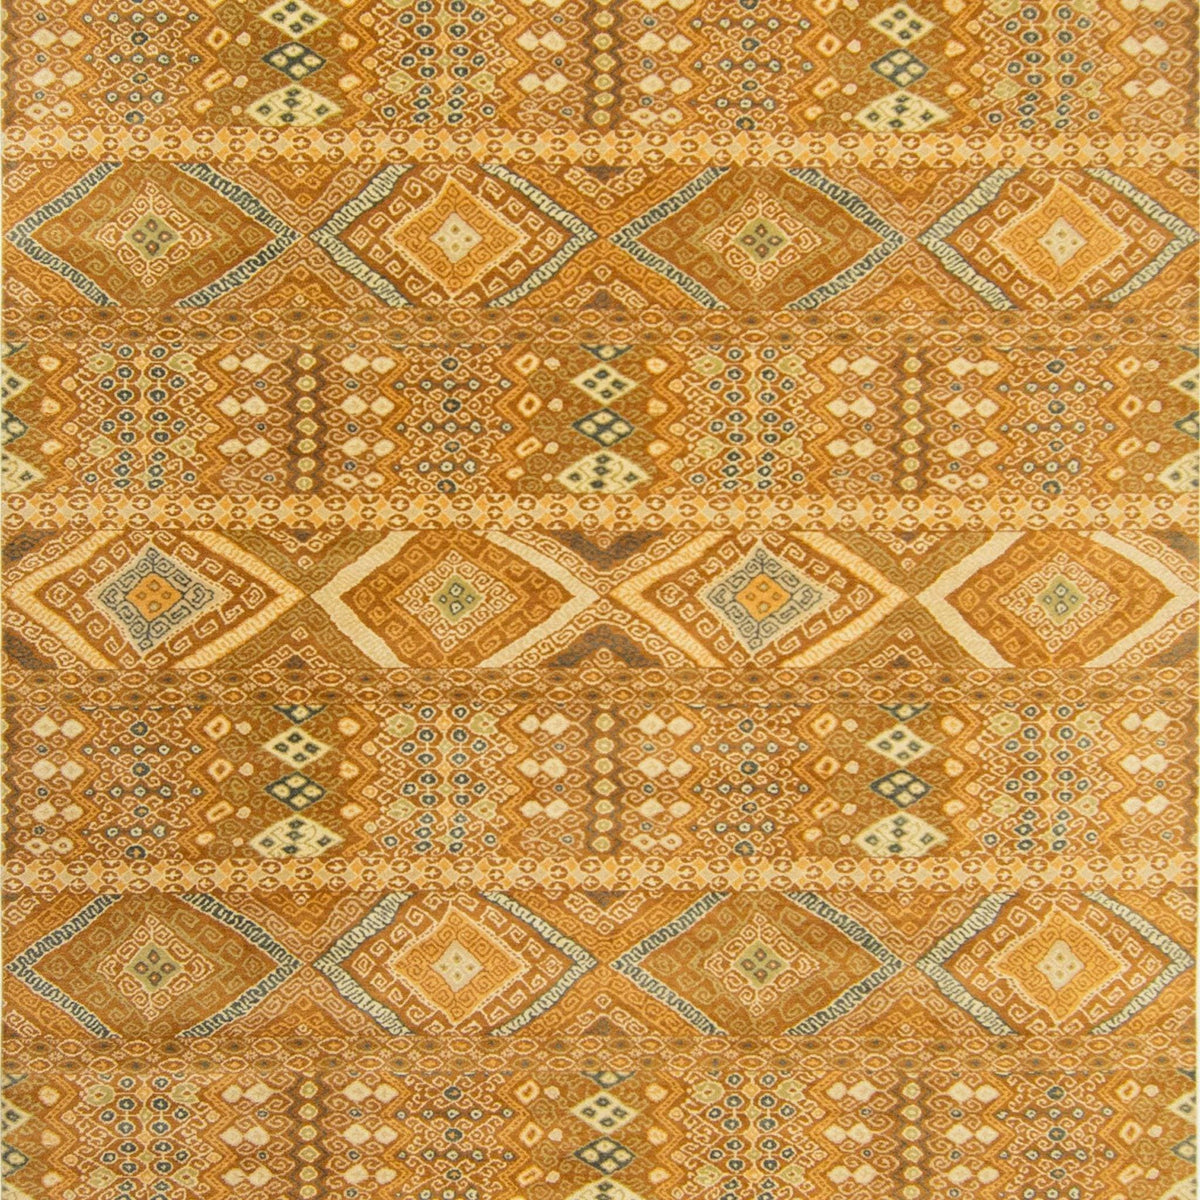 Hand-knotted Contemporary Wool Aztec Design Rug 245ccm x 308cm